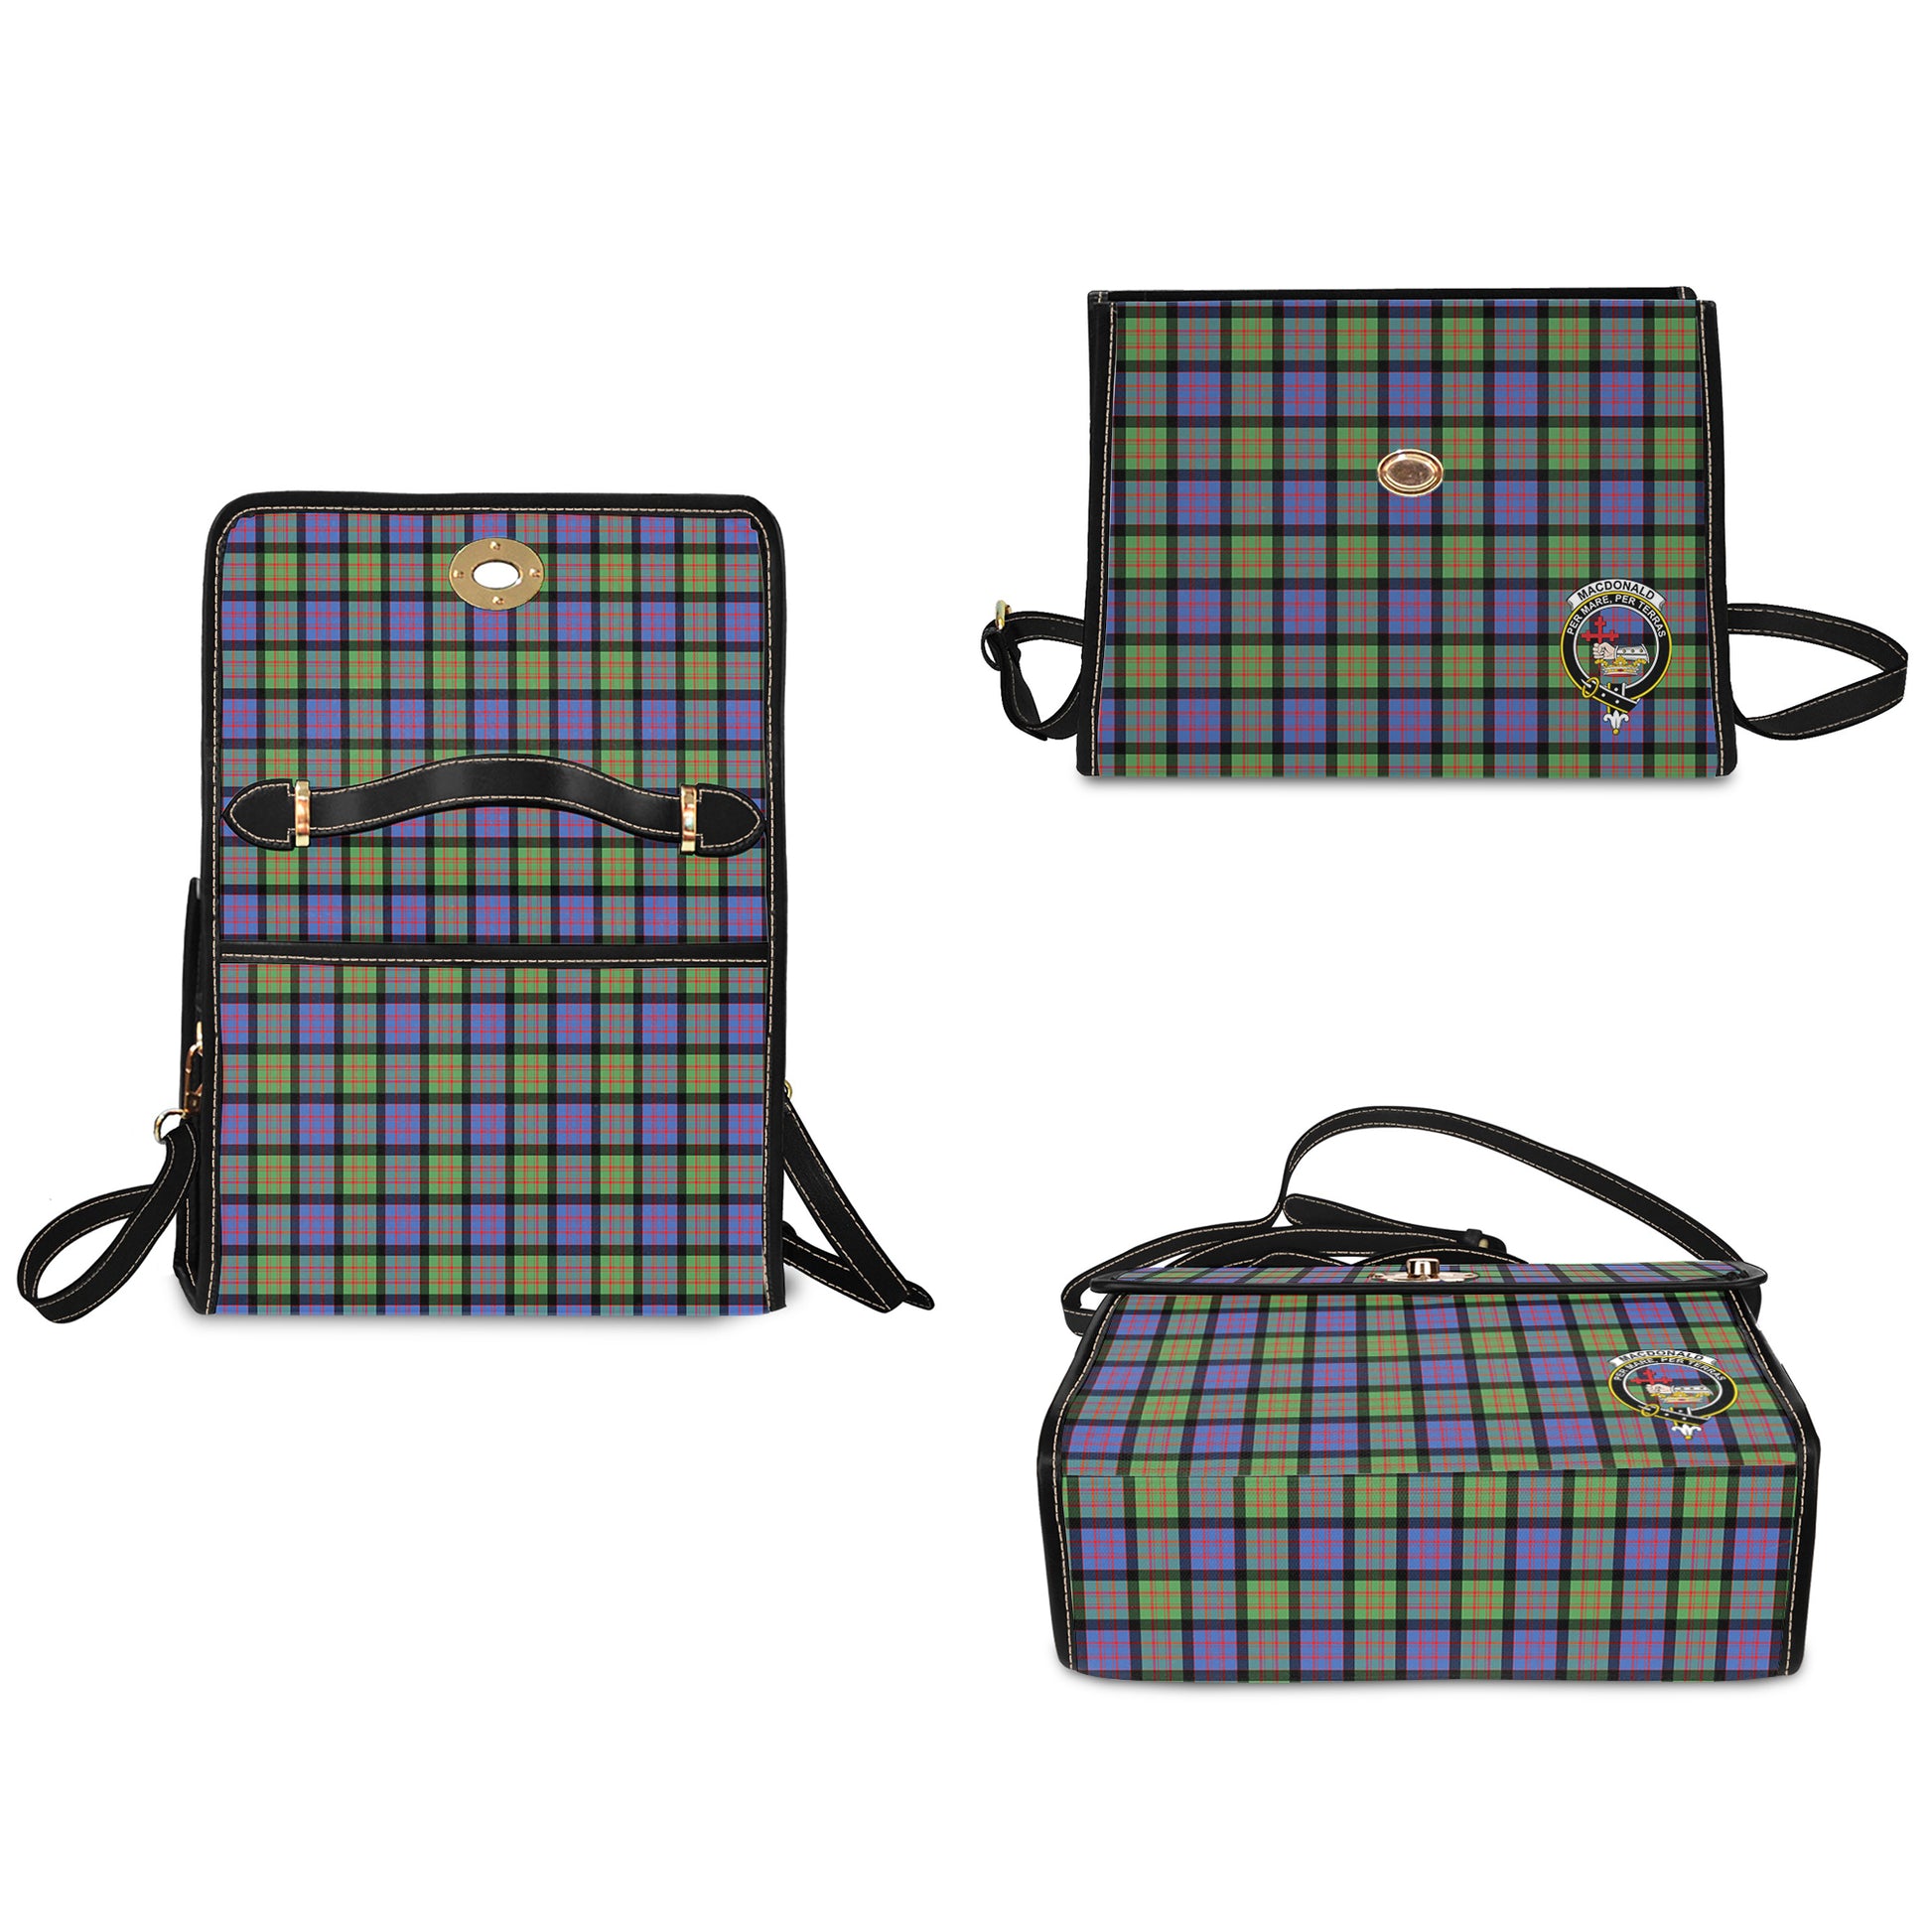 macdonald-ancient-tartan-leather-strap-waterproof-canvas-bag-with-family-crest